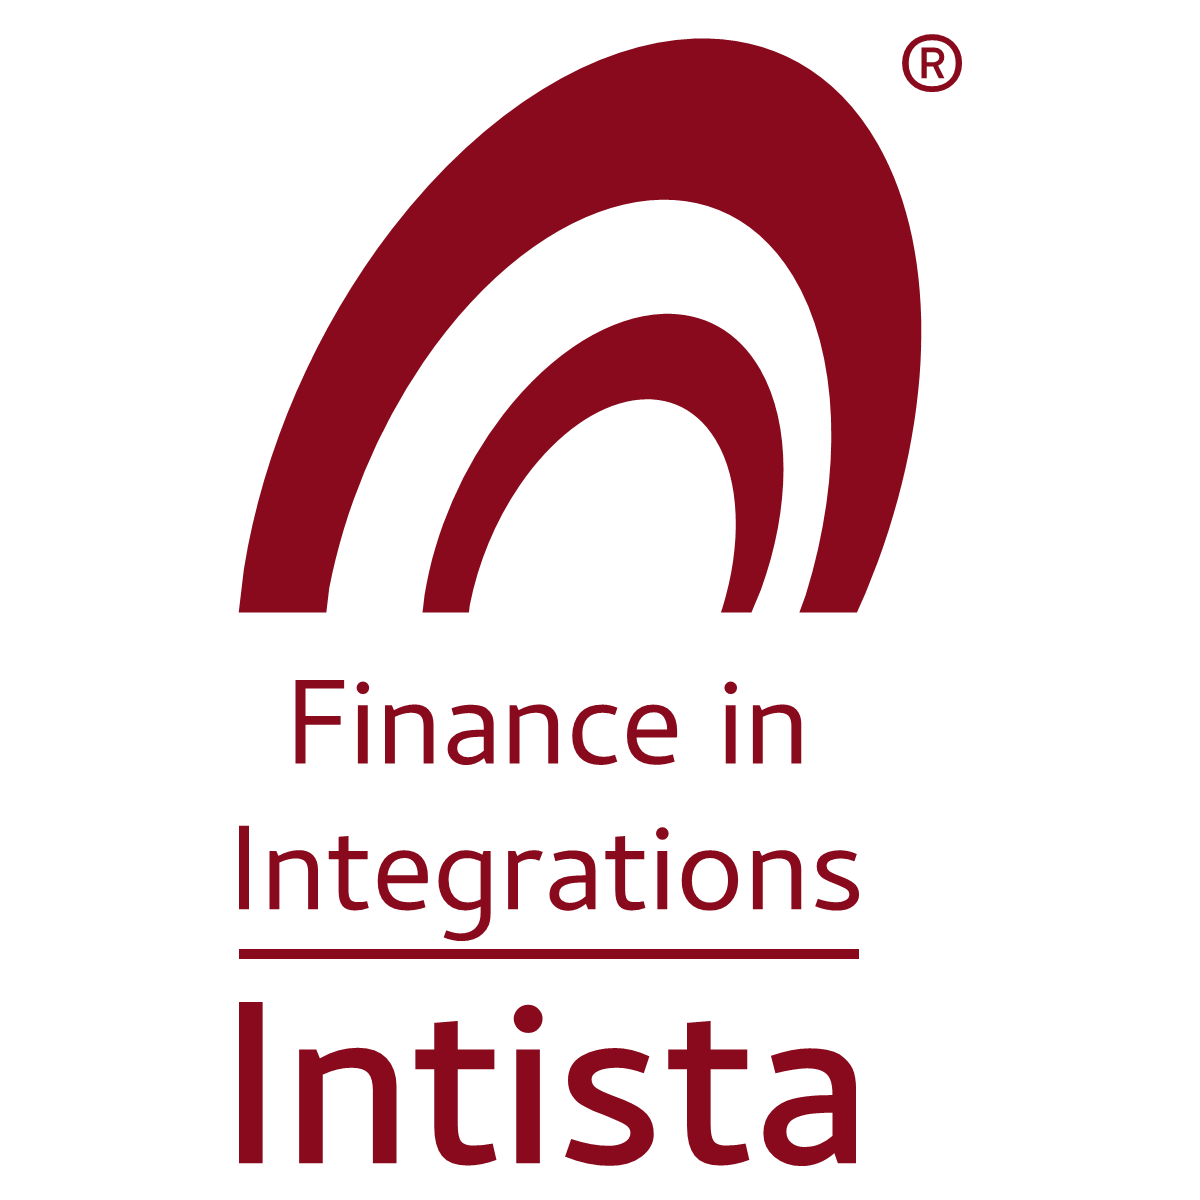 Finance in Integrations